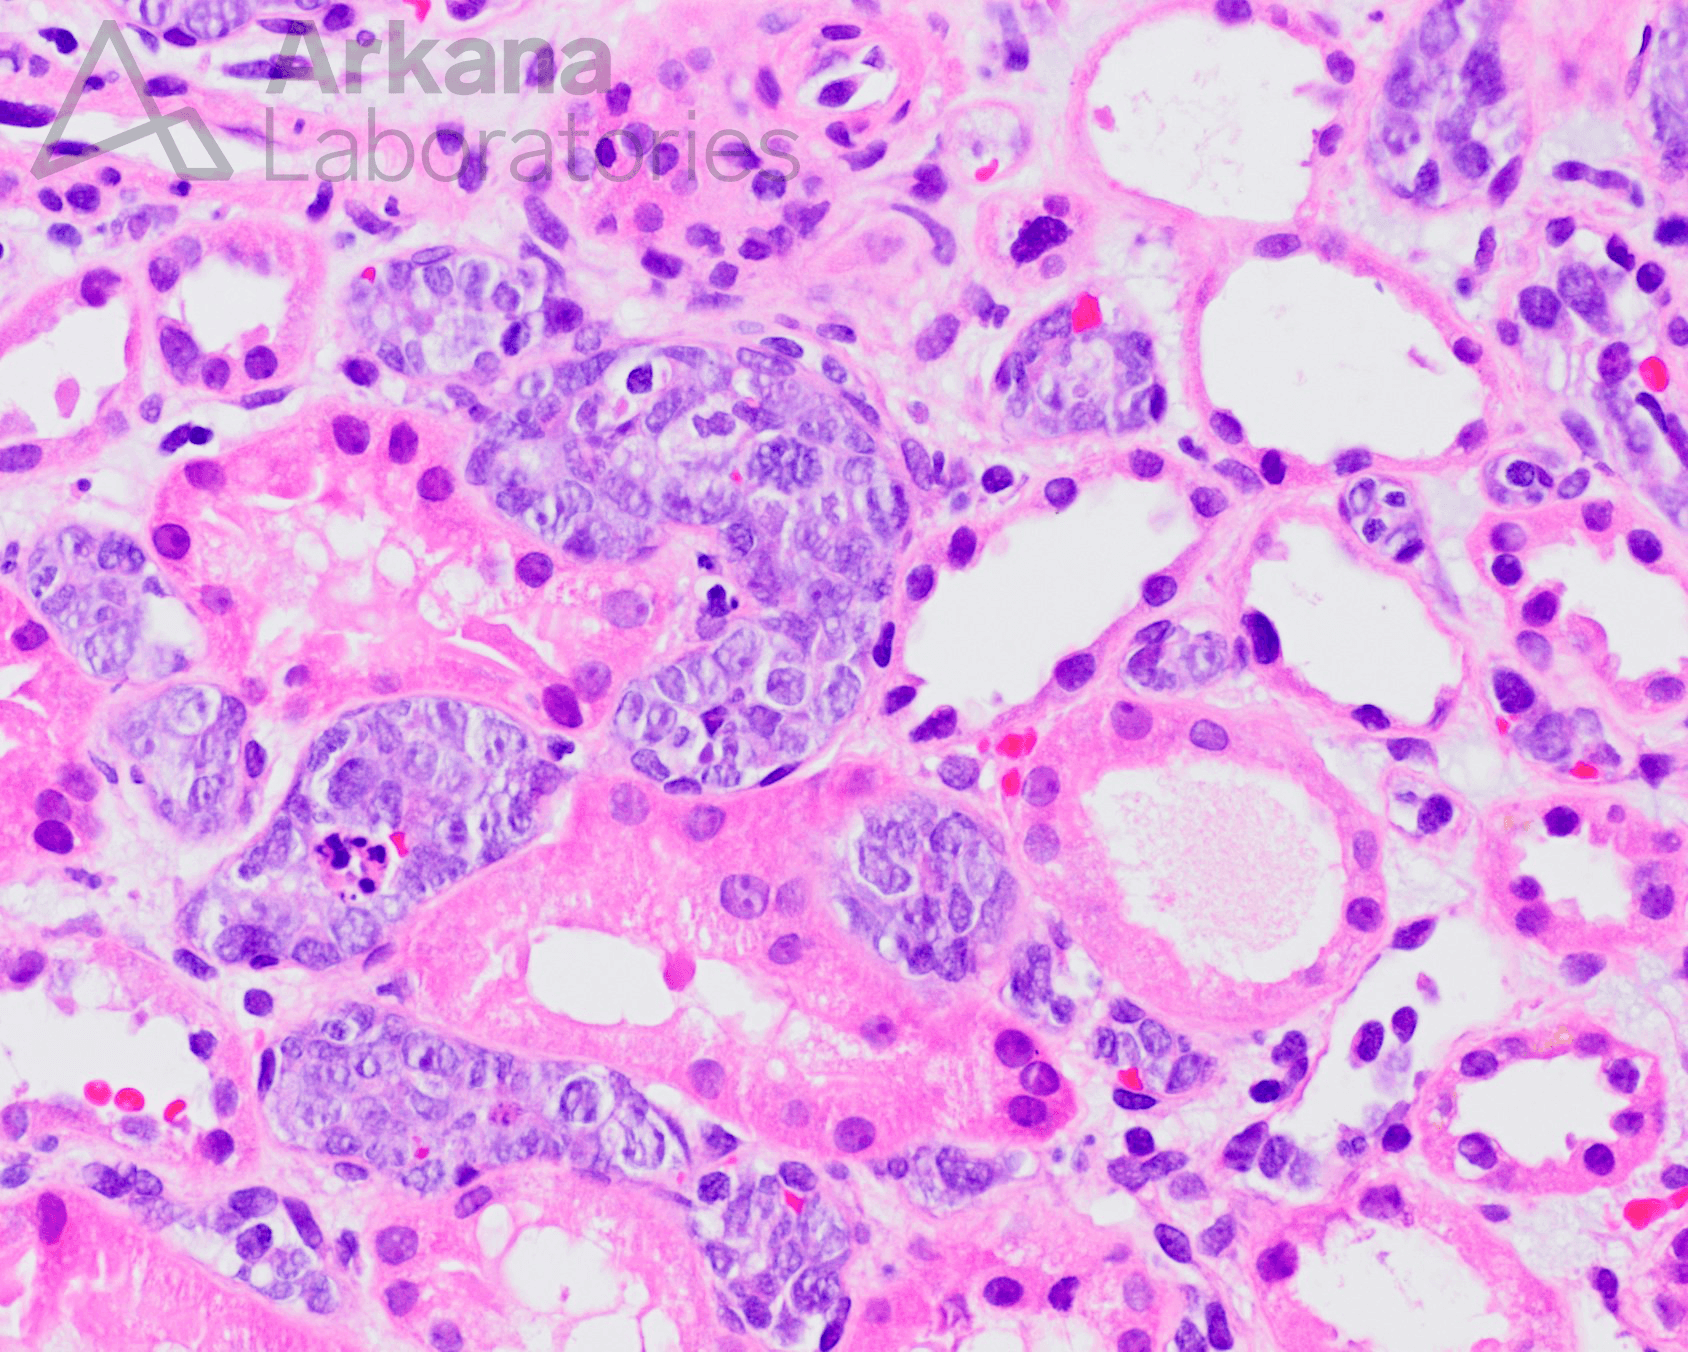 large B-cell lymphoma H&E Stain